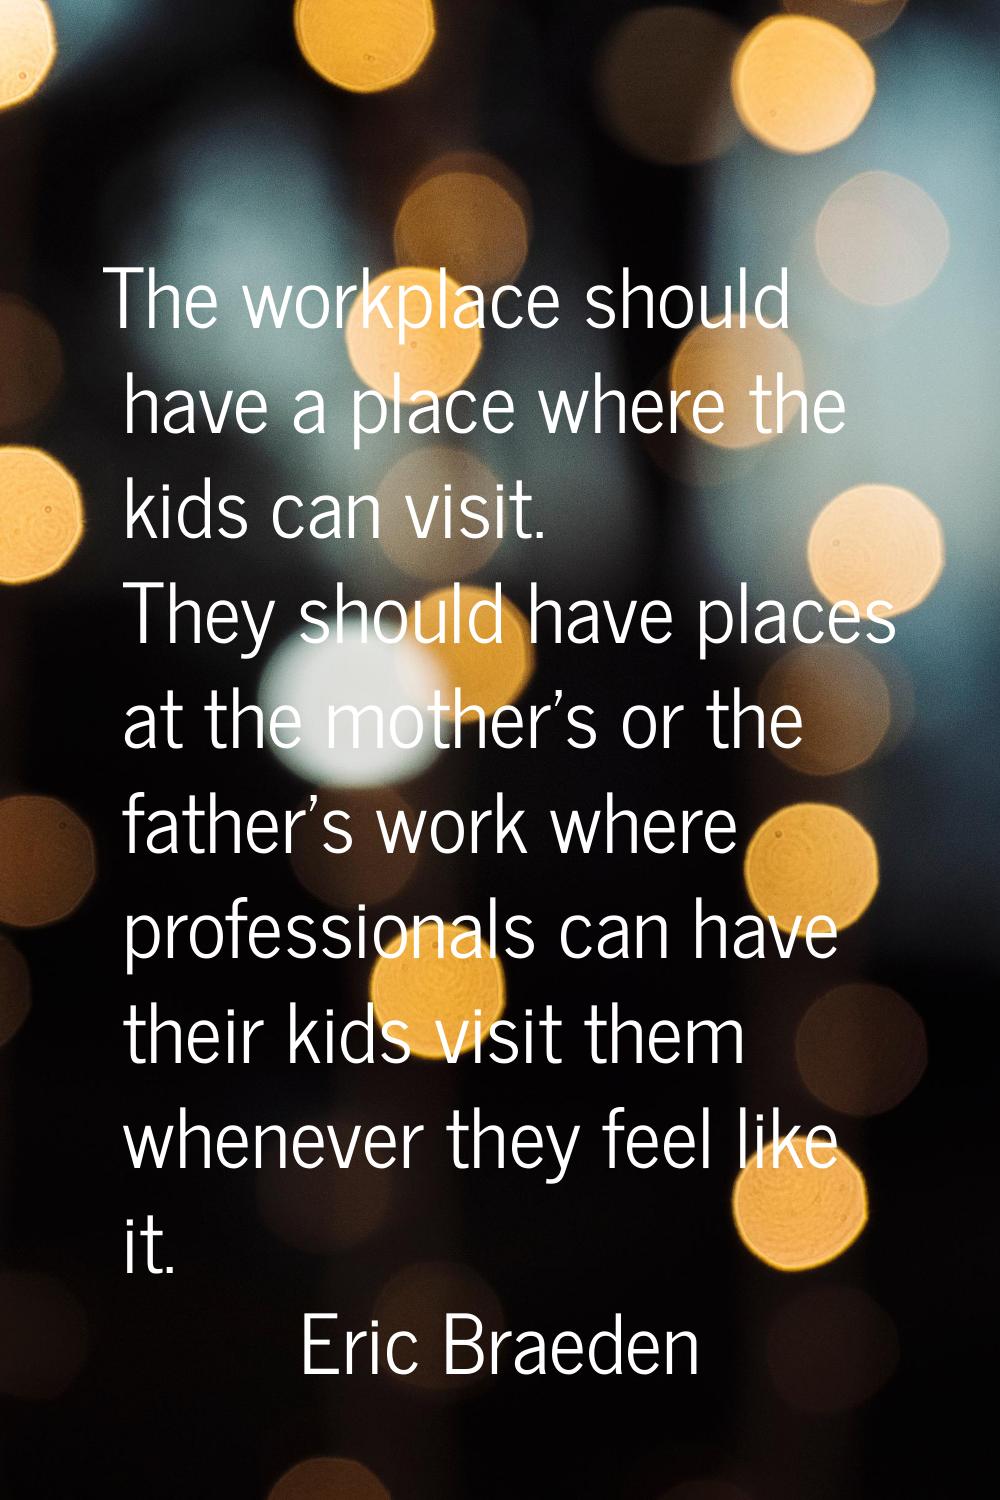 The workplace should have a place where the kids can visit. They should have places at the mother's